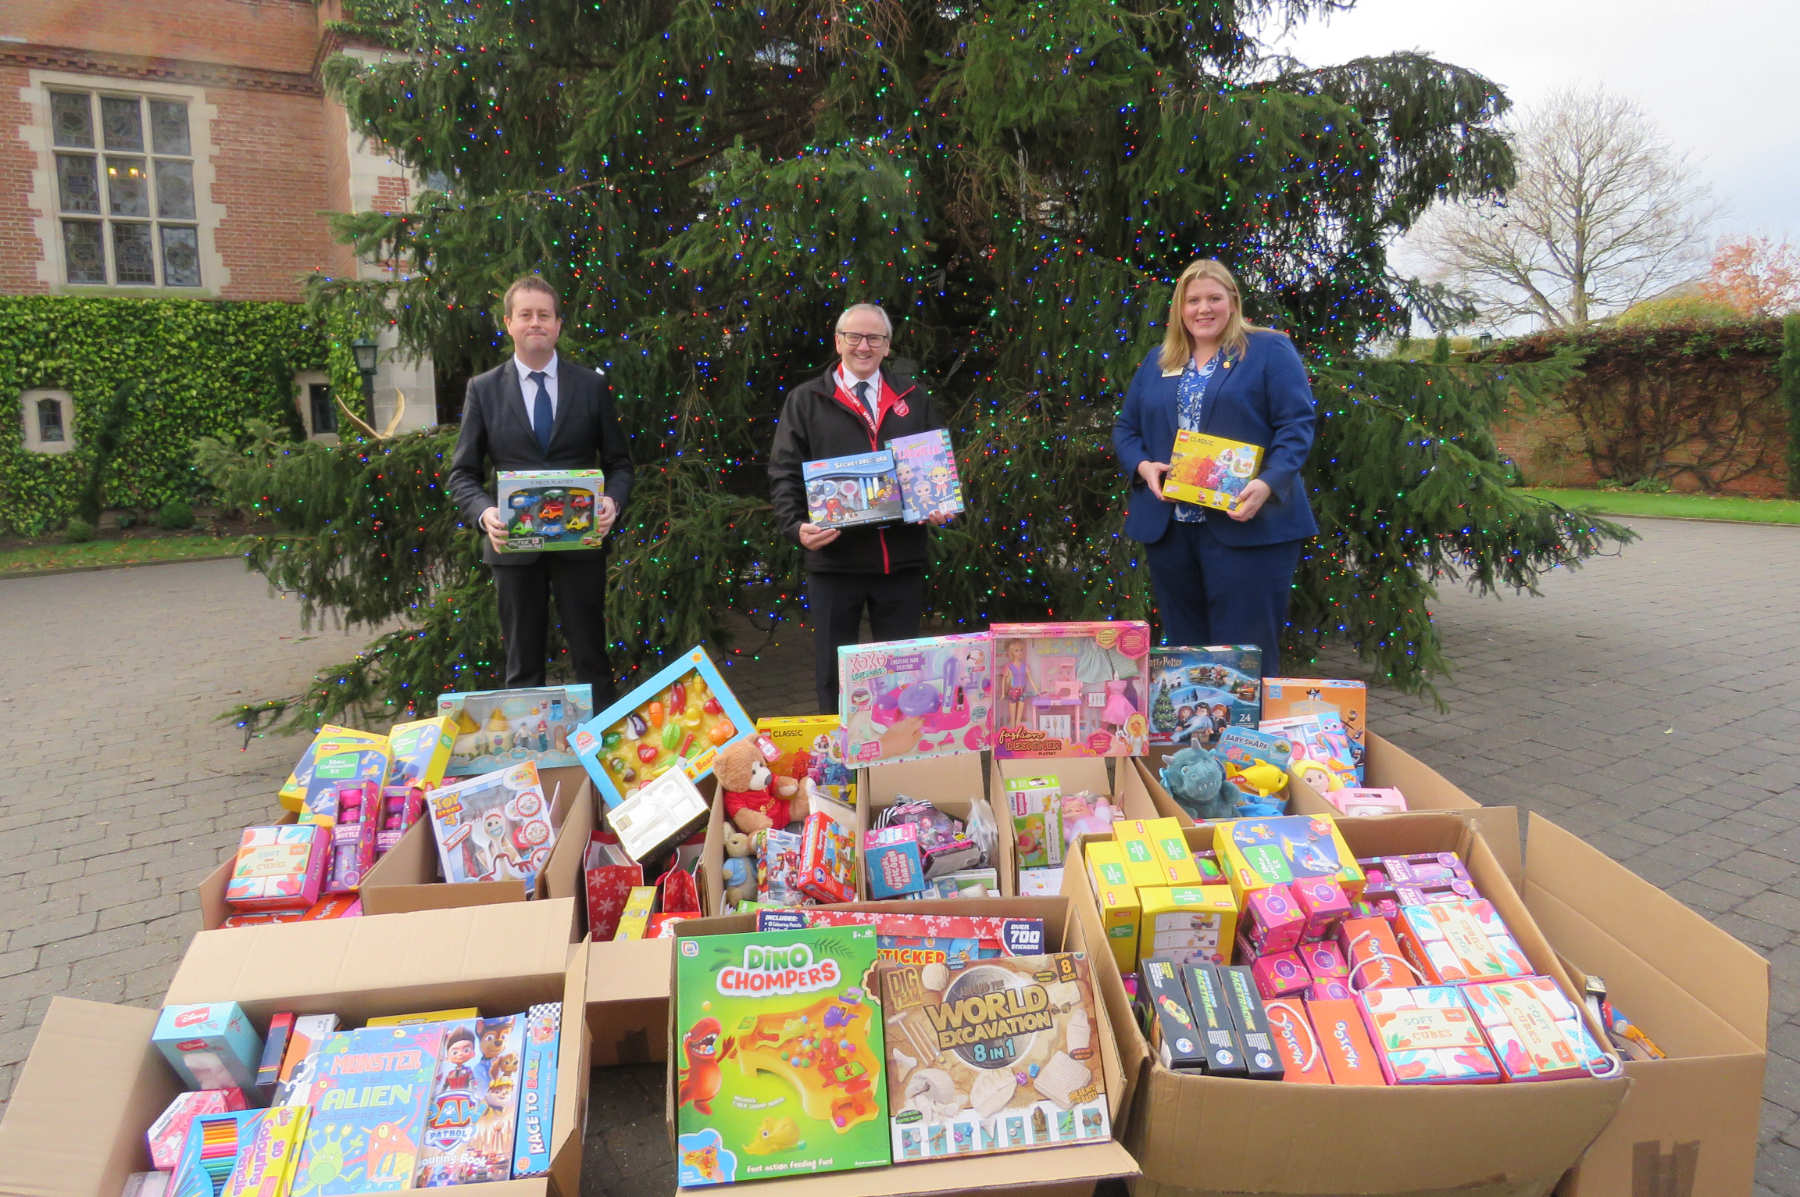 (From L-R) Principal of Queen Ethelburga’s Collegiate Dan Machin, Major Andrew Dunkinson of the York Salvation Army Corps and Amy Martin, Chair of the Board at QE, with the gifts collected by the QE Community for the 2021 Christmas Present Appeal